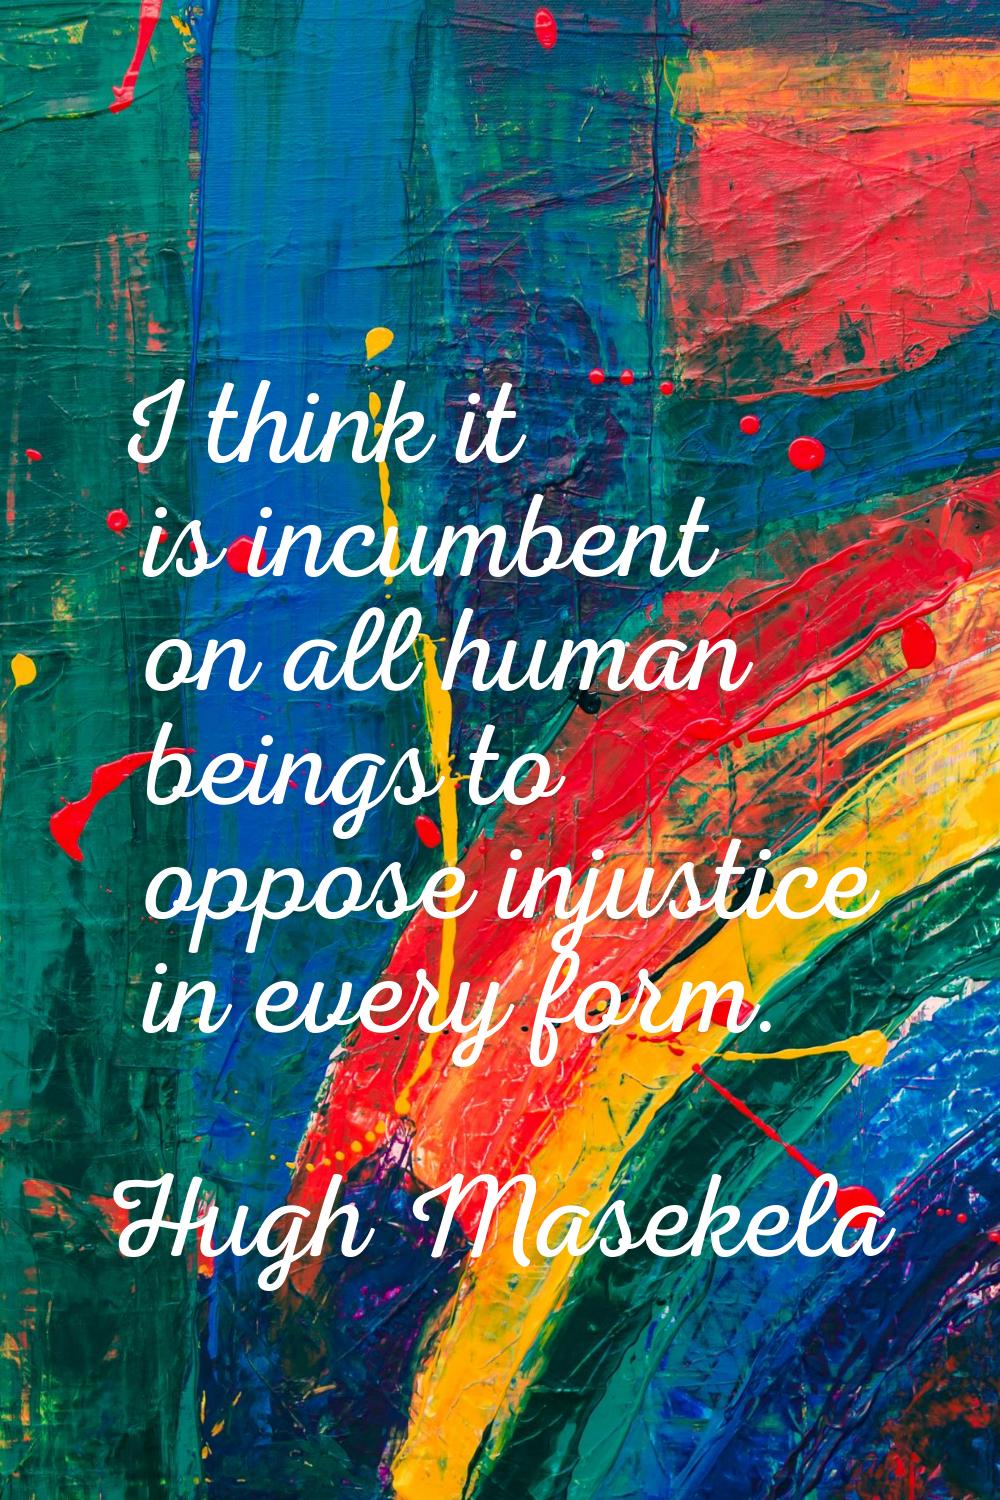 I think it is incumbent on all human beings to oppose injustice in every form.